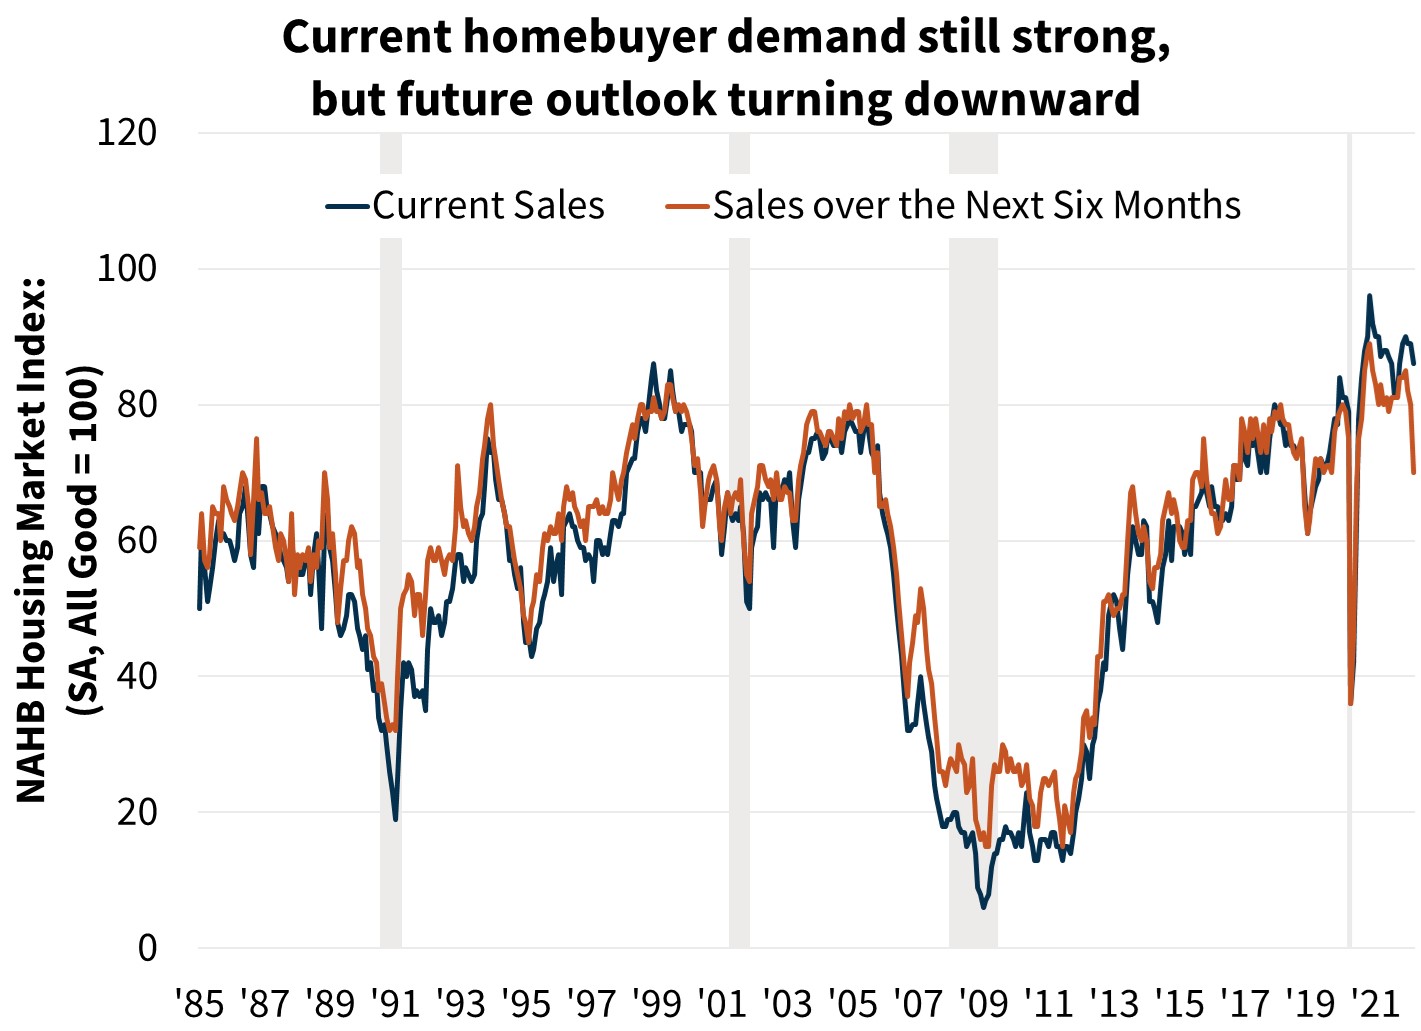  Current Homebuying demand still strong, but future outlook turning downward